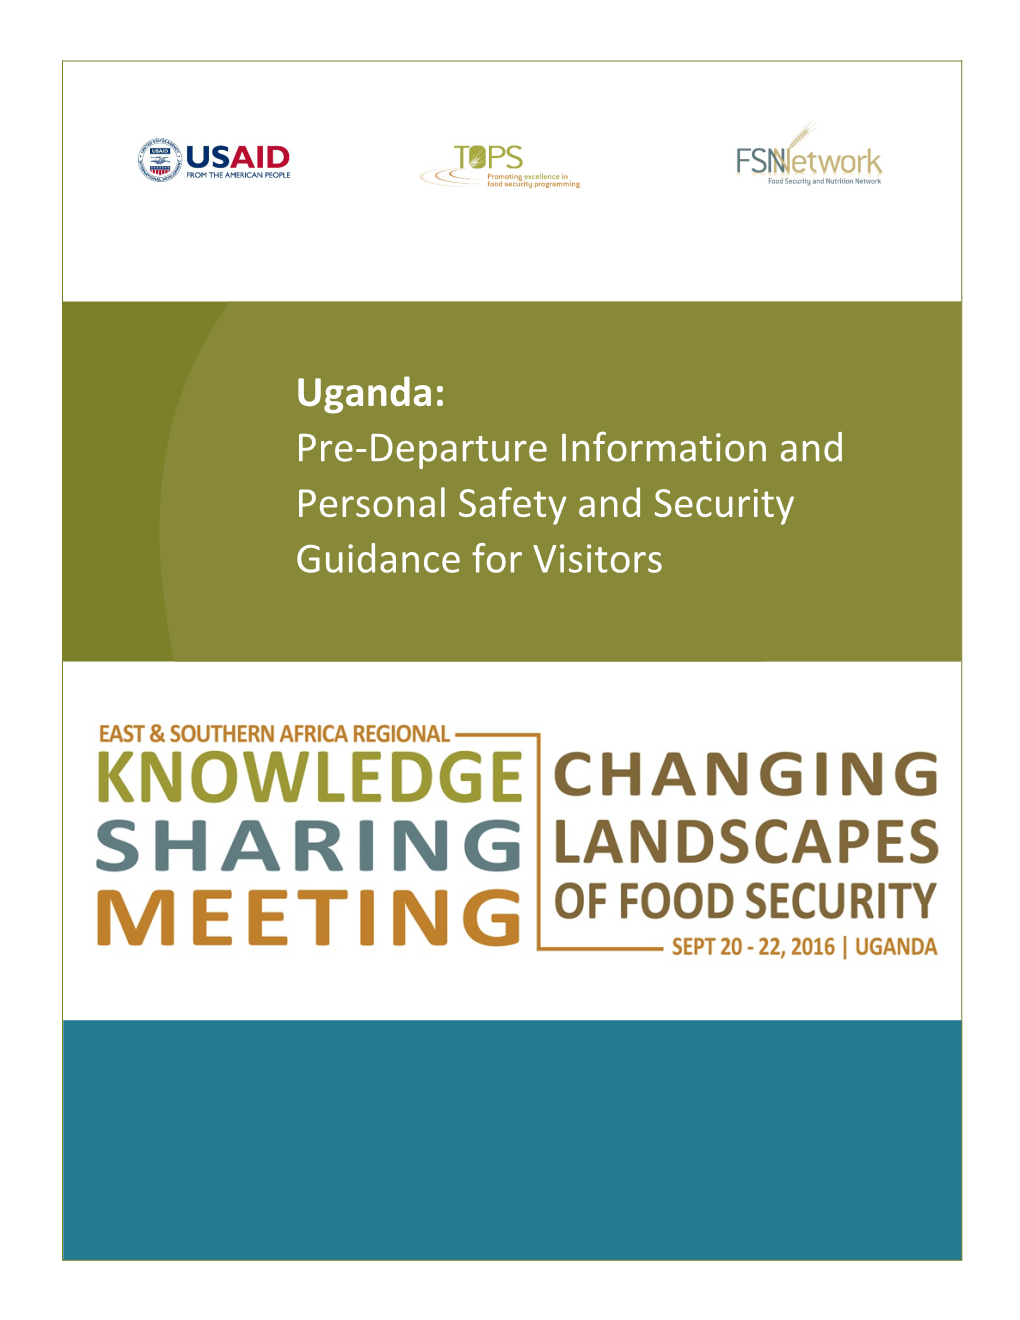 Uganda: Pre-Departure Information and Personal Safety and Security Guidance for Visitors